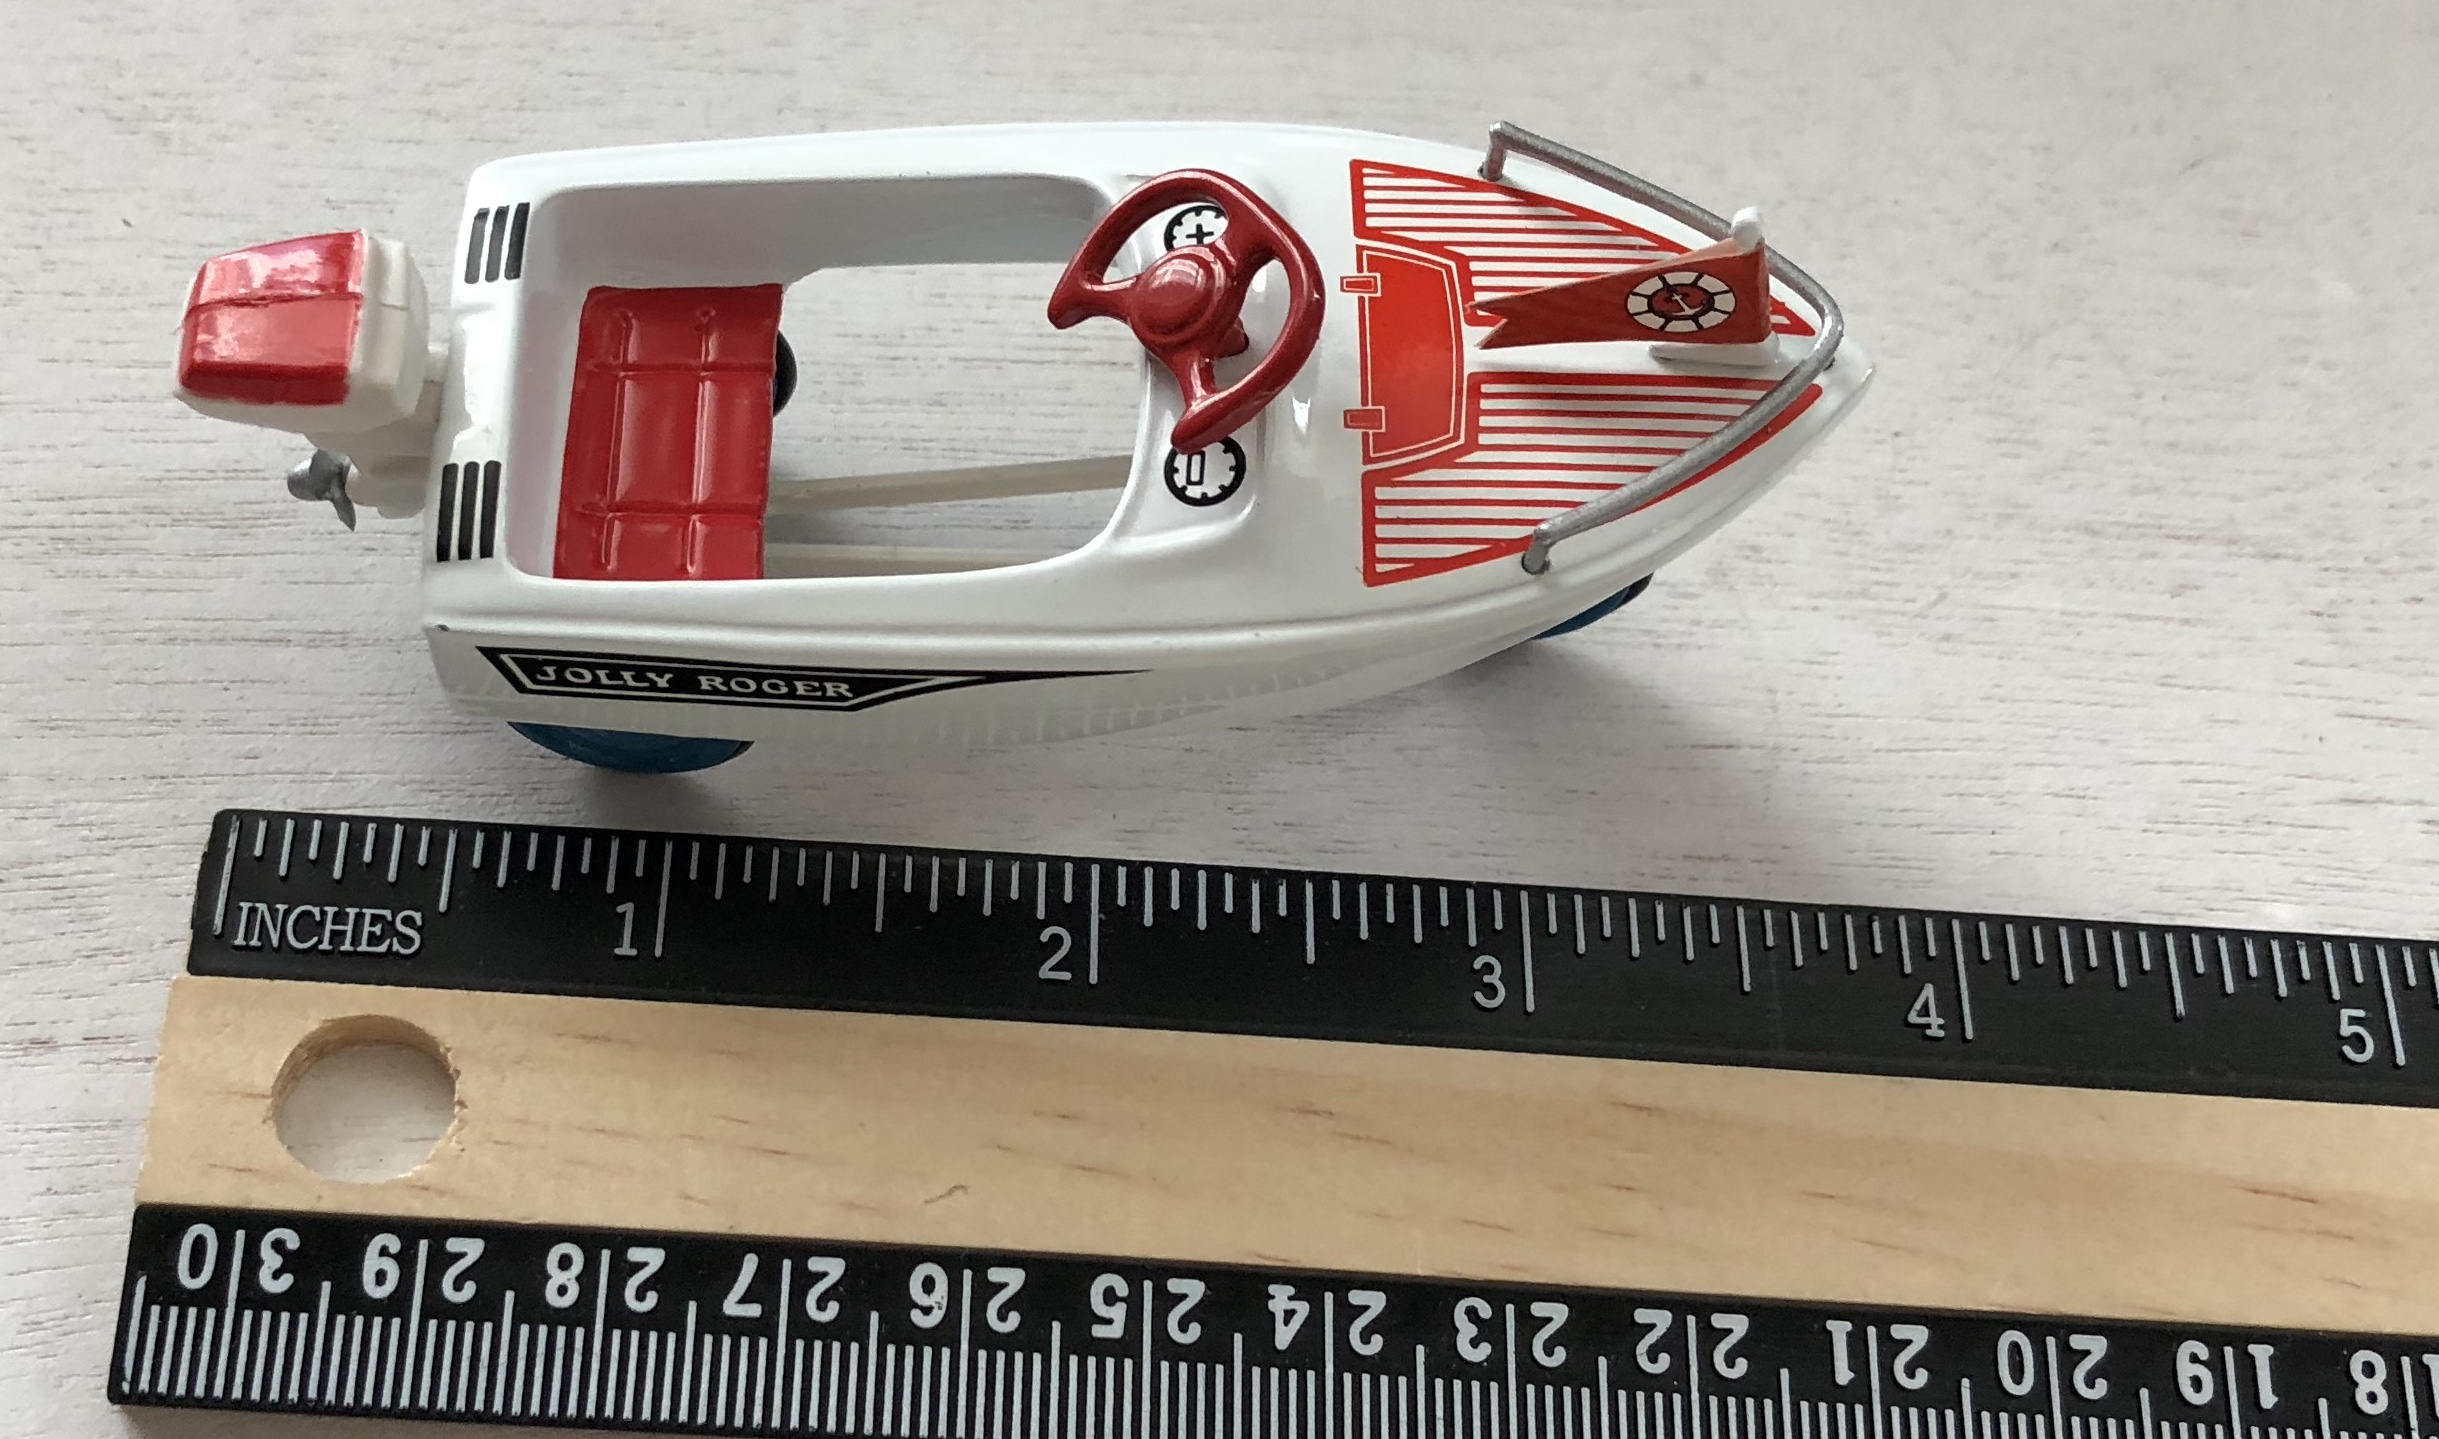 Miniature Boat, Jolly Roger Toy Peddle Boat, Riding Toy Boat, Dollhouse  Miniature, 1:12 Scale, Dollhouse Accessory, Toy, Crafts, Topper